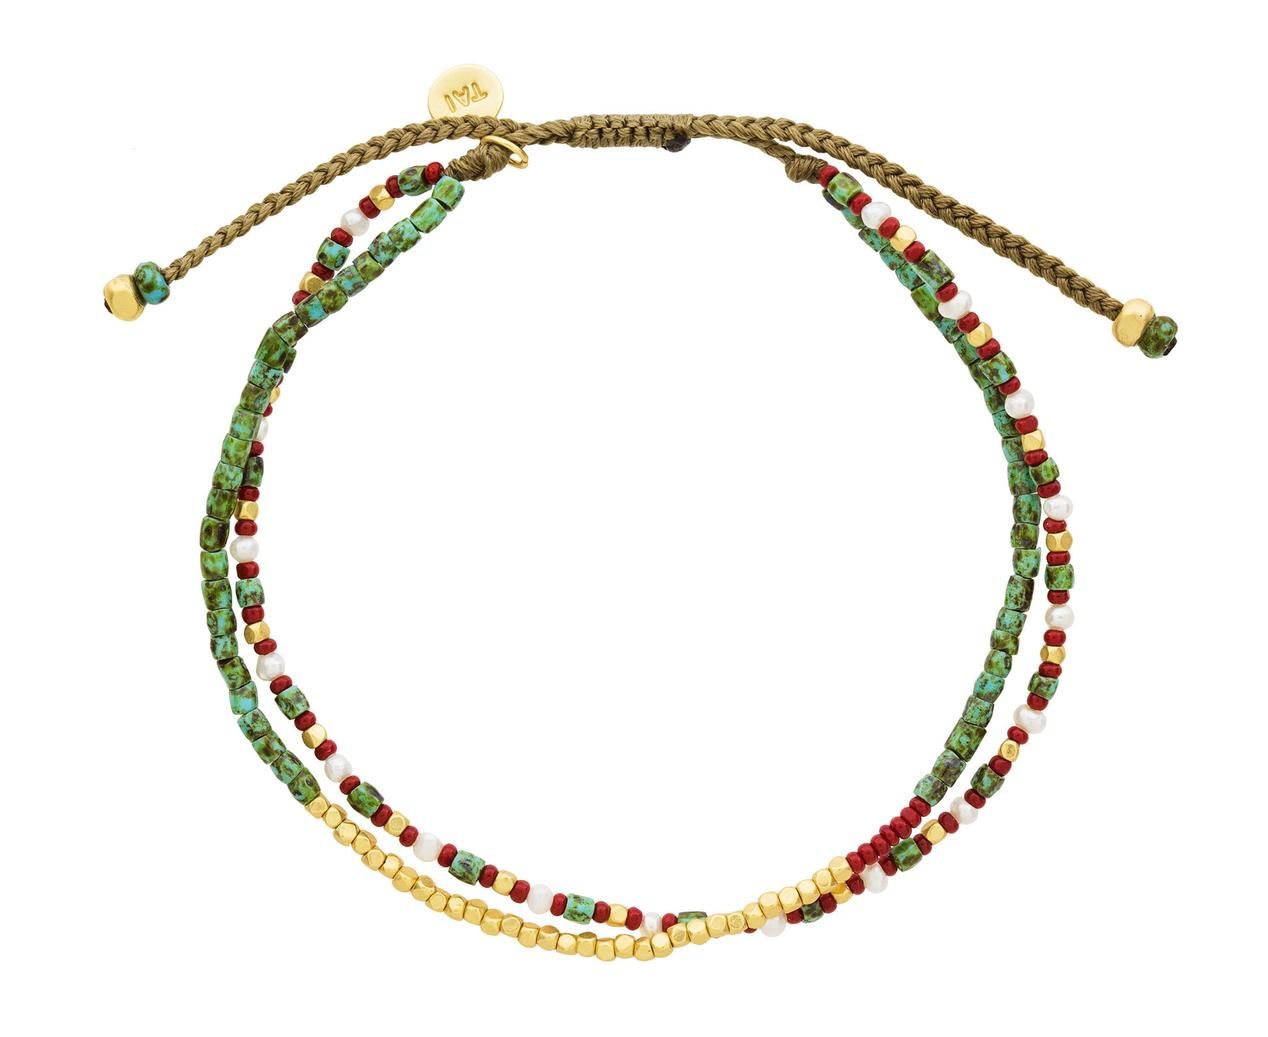 ES011 Bracelet, multi colored beads expandable wire — The